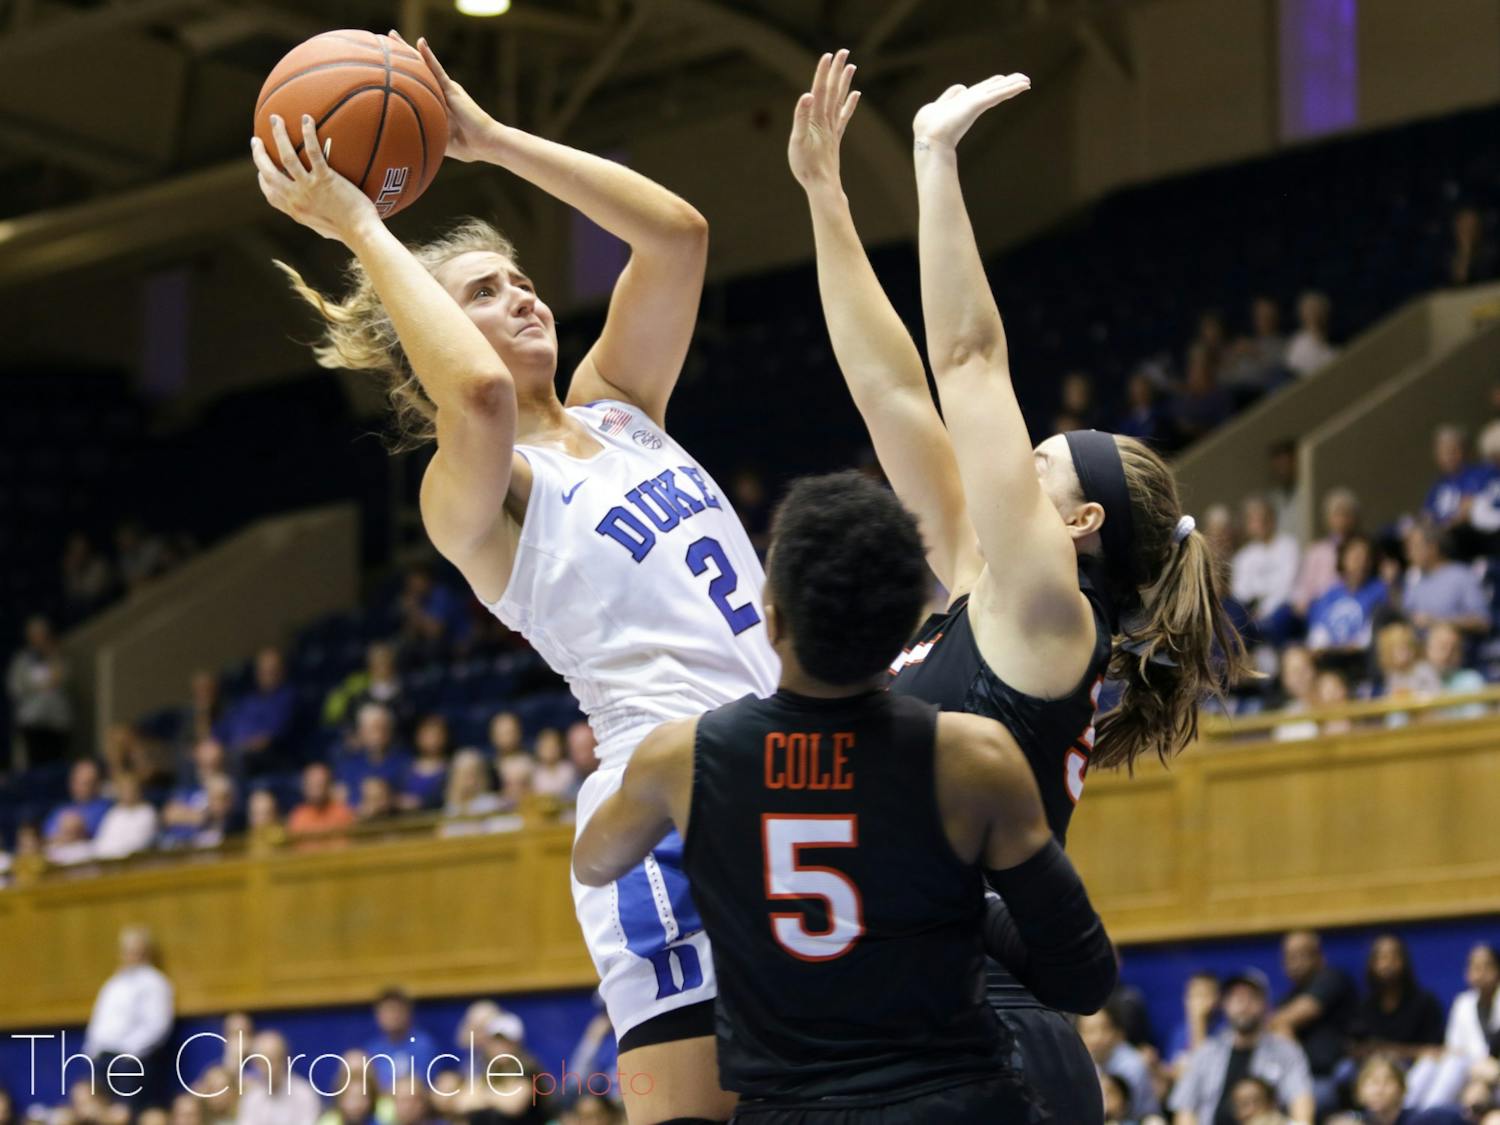 Duke Women's Basketball played the Virginia Tech Hokies at Cameron Indoor Stadium. The Blue Devils took the win, with a final score of 72-67.&nbsp;